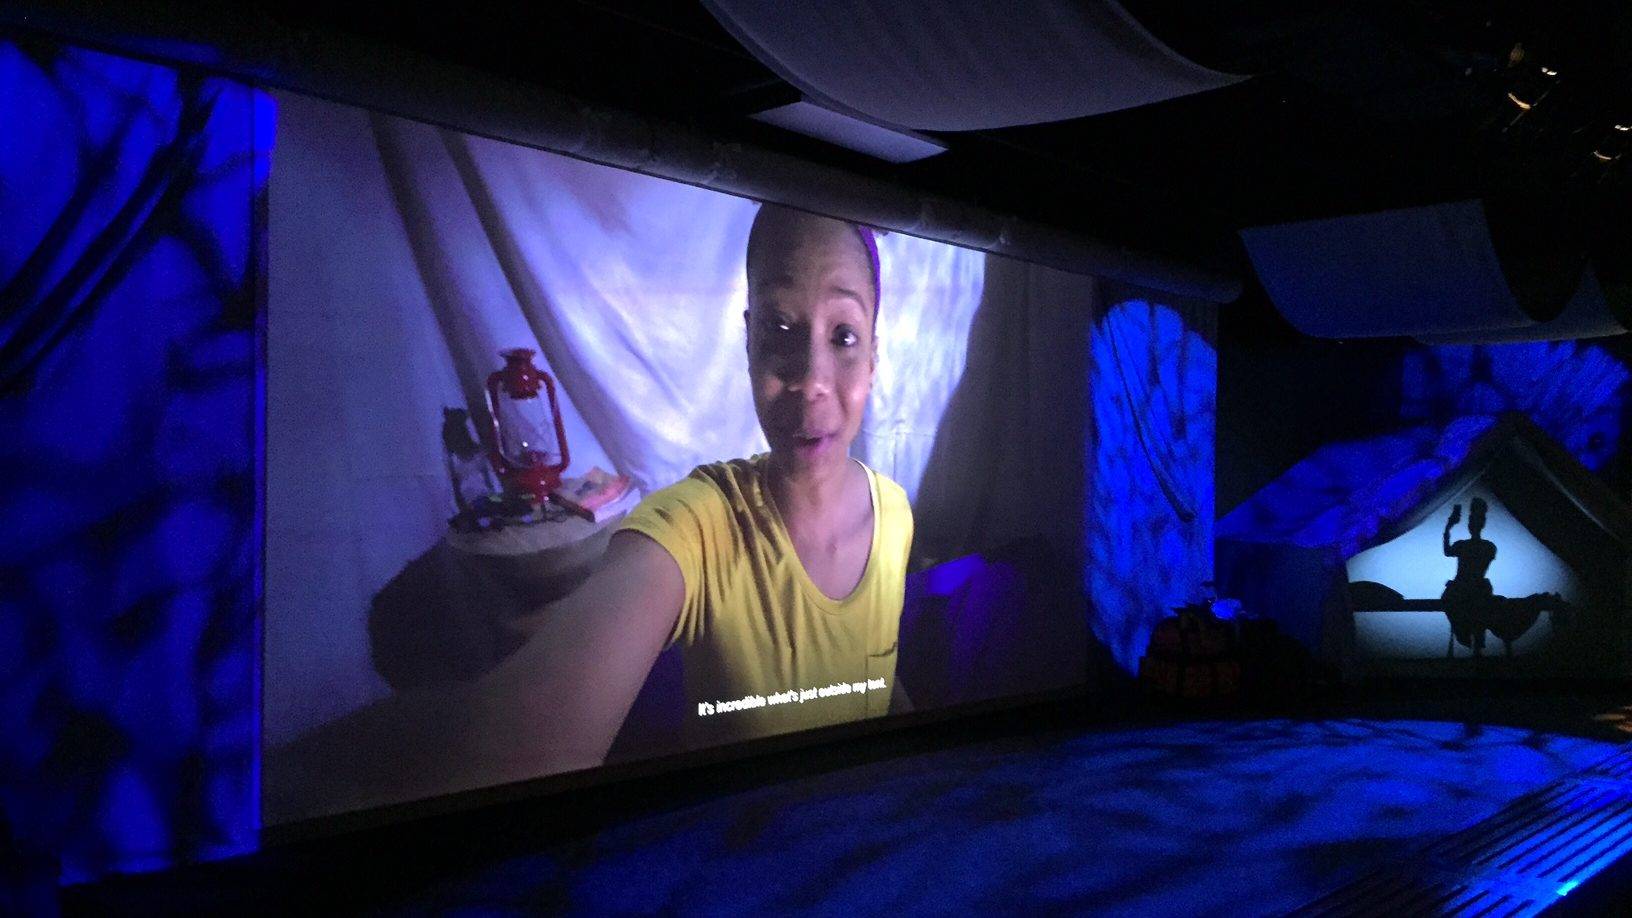 Exhibit screen shows a young girl vlogging in a tent